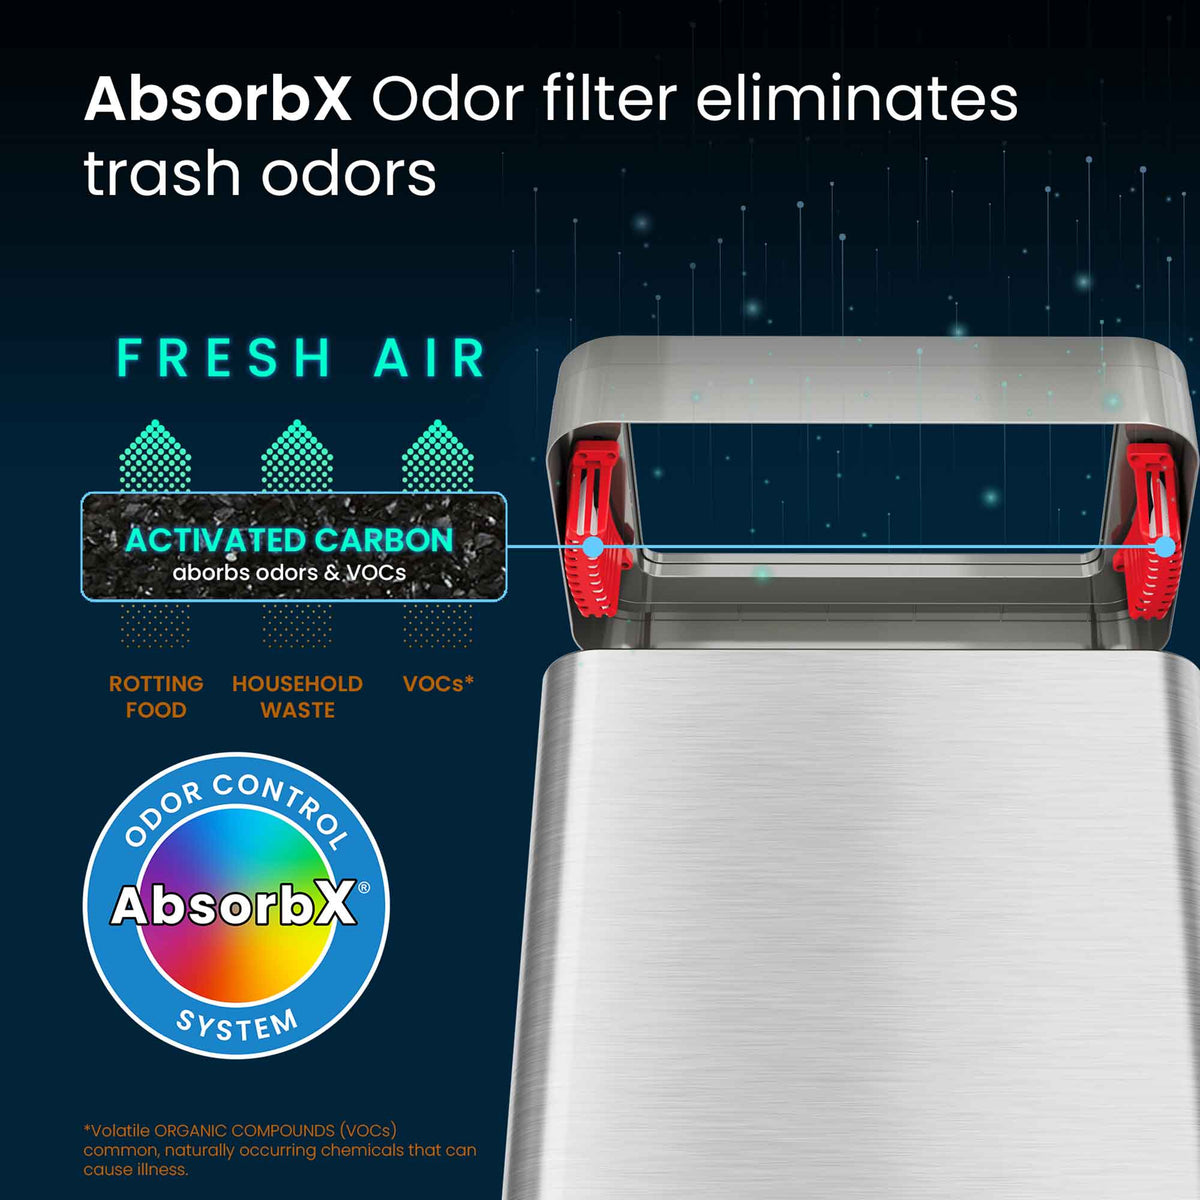 21 Gallon / 80 Liter Rectangular Open Top Trash Can with Wheels AbosrbX Odor Filters eliminate trash odors